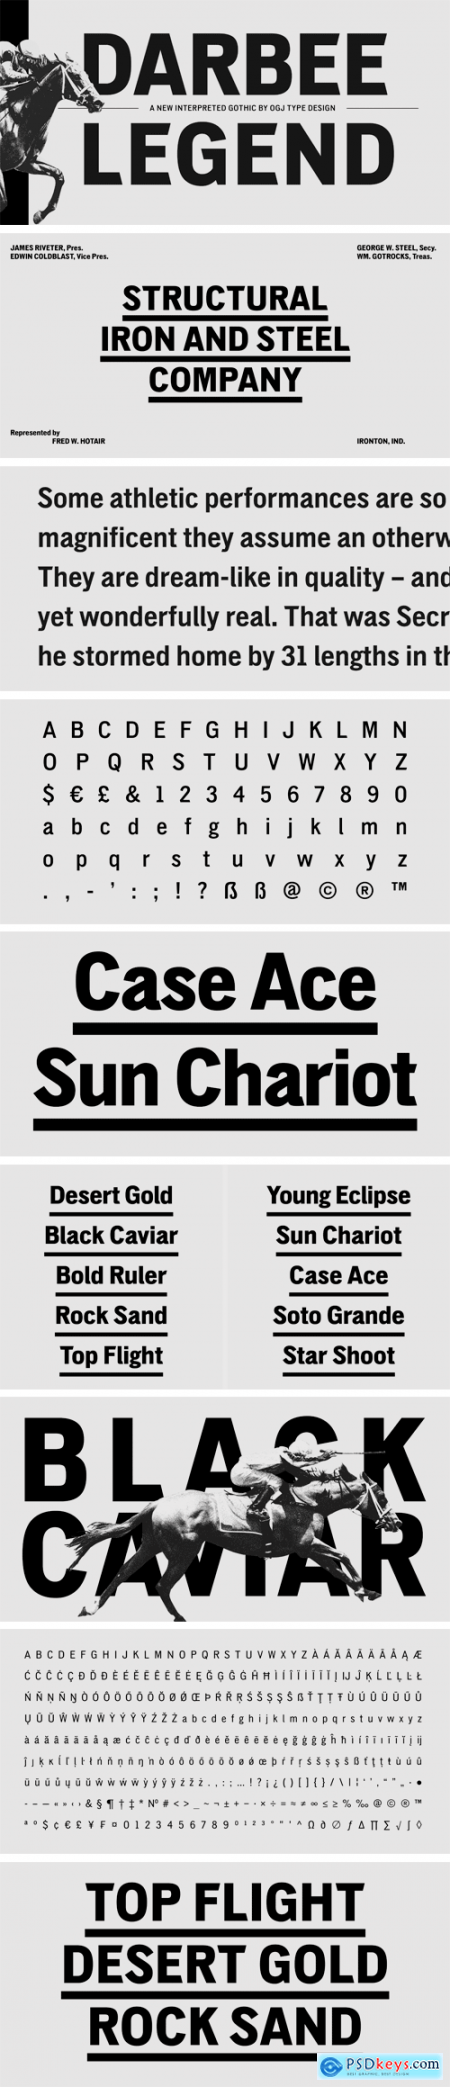 Darbee Legend Font Family